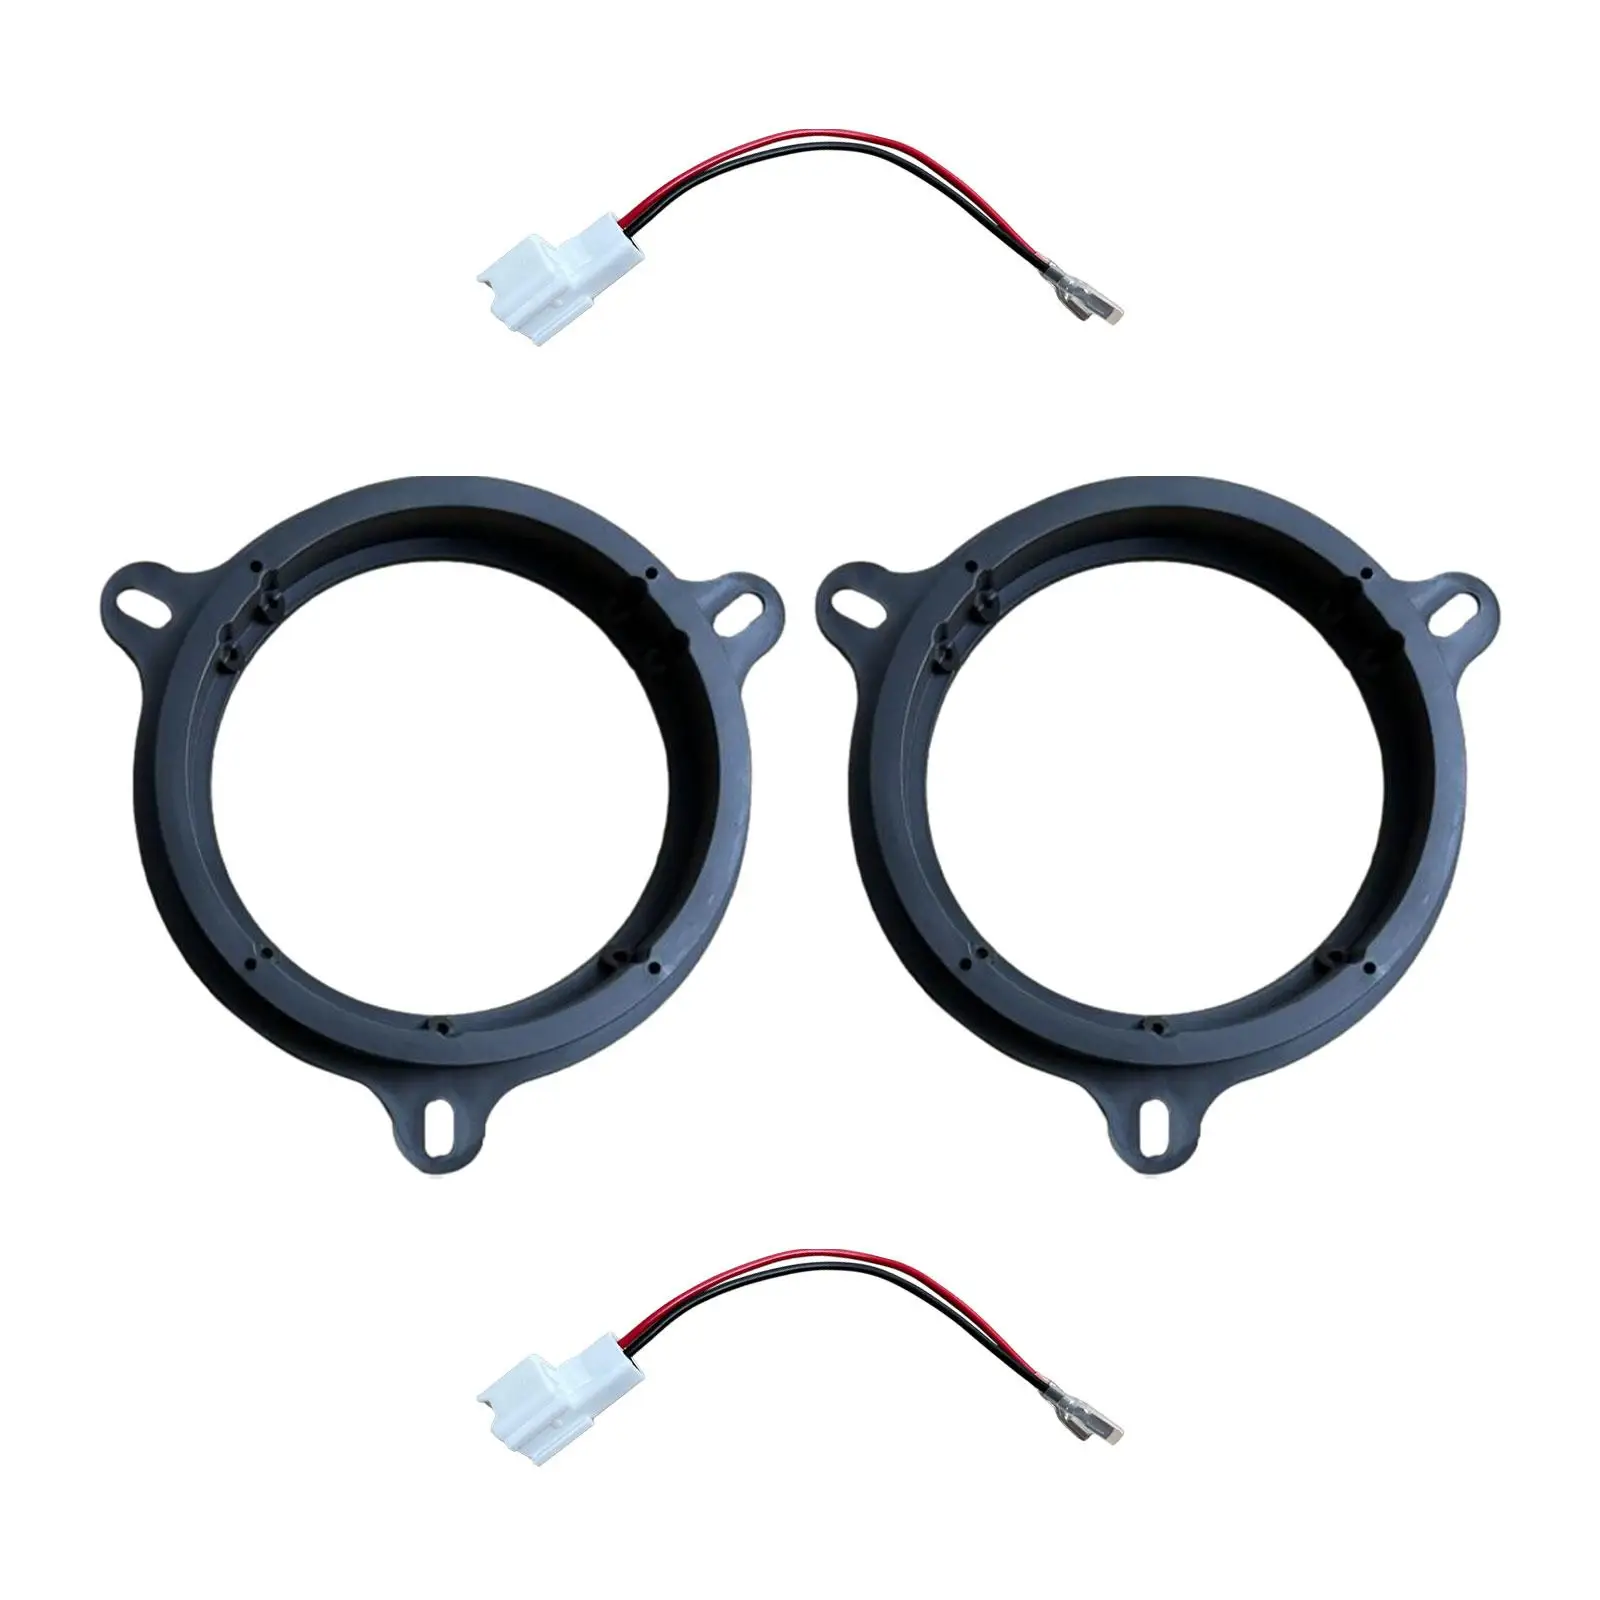 Wiring Harness Set Audio Washers Spacer Gasket Mount Shims Mounting Replacement Car Speaker Spacer Adapter Fitting